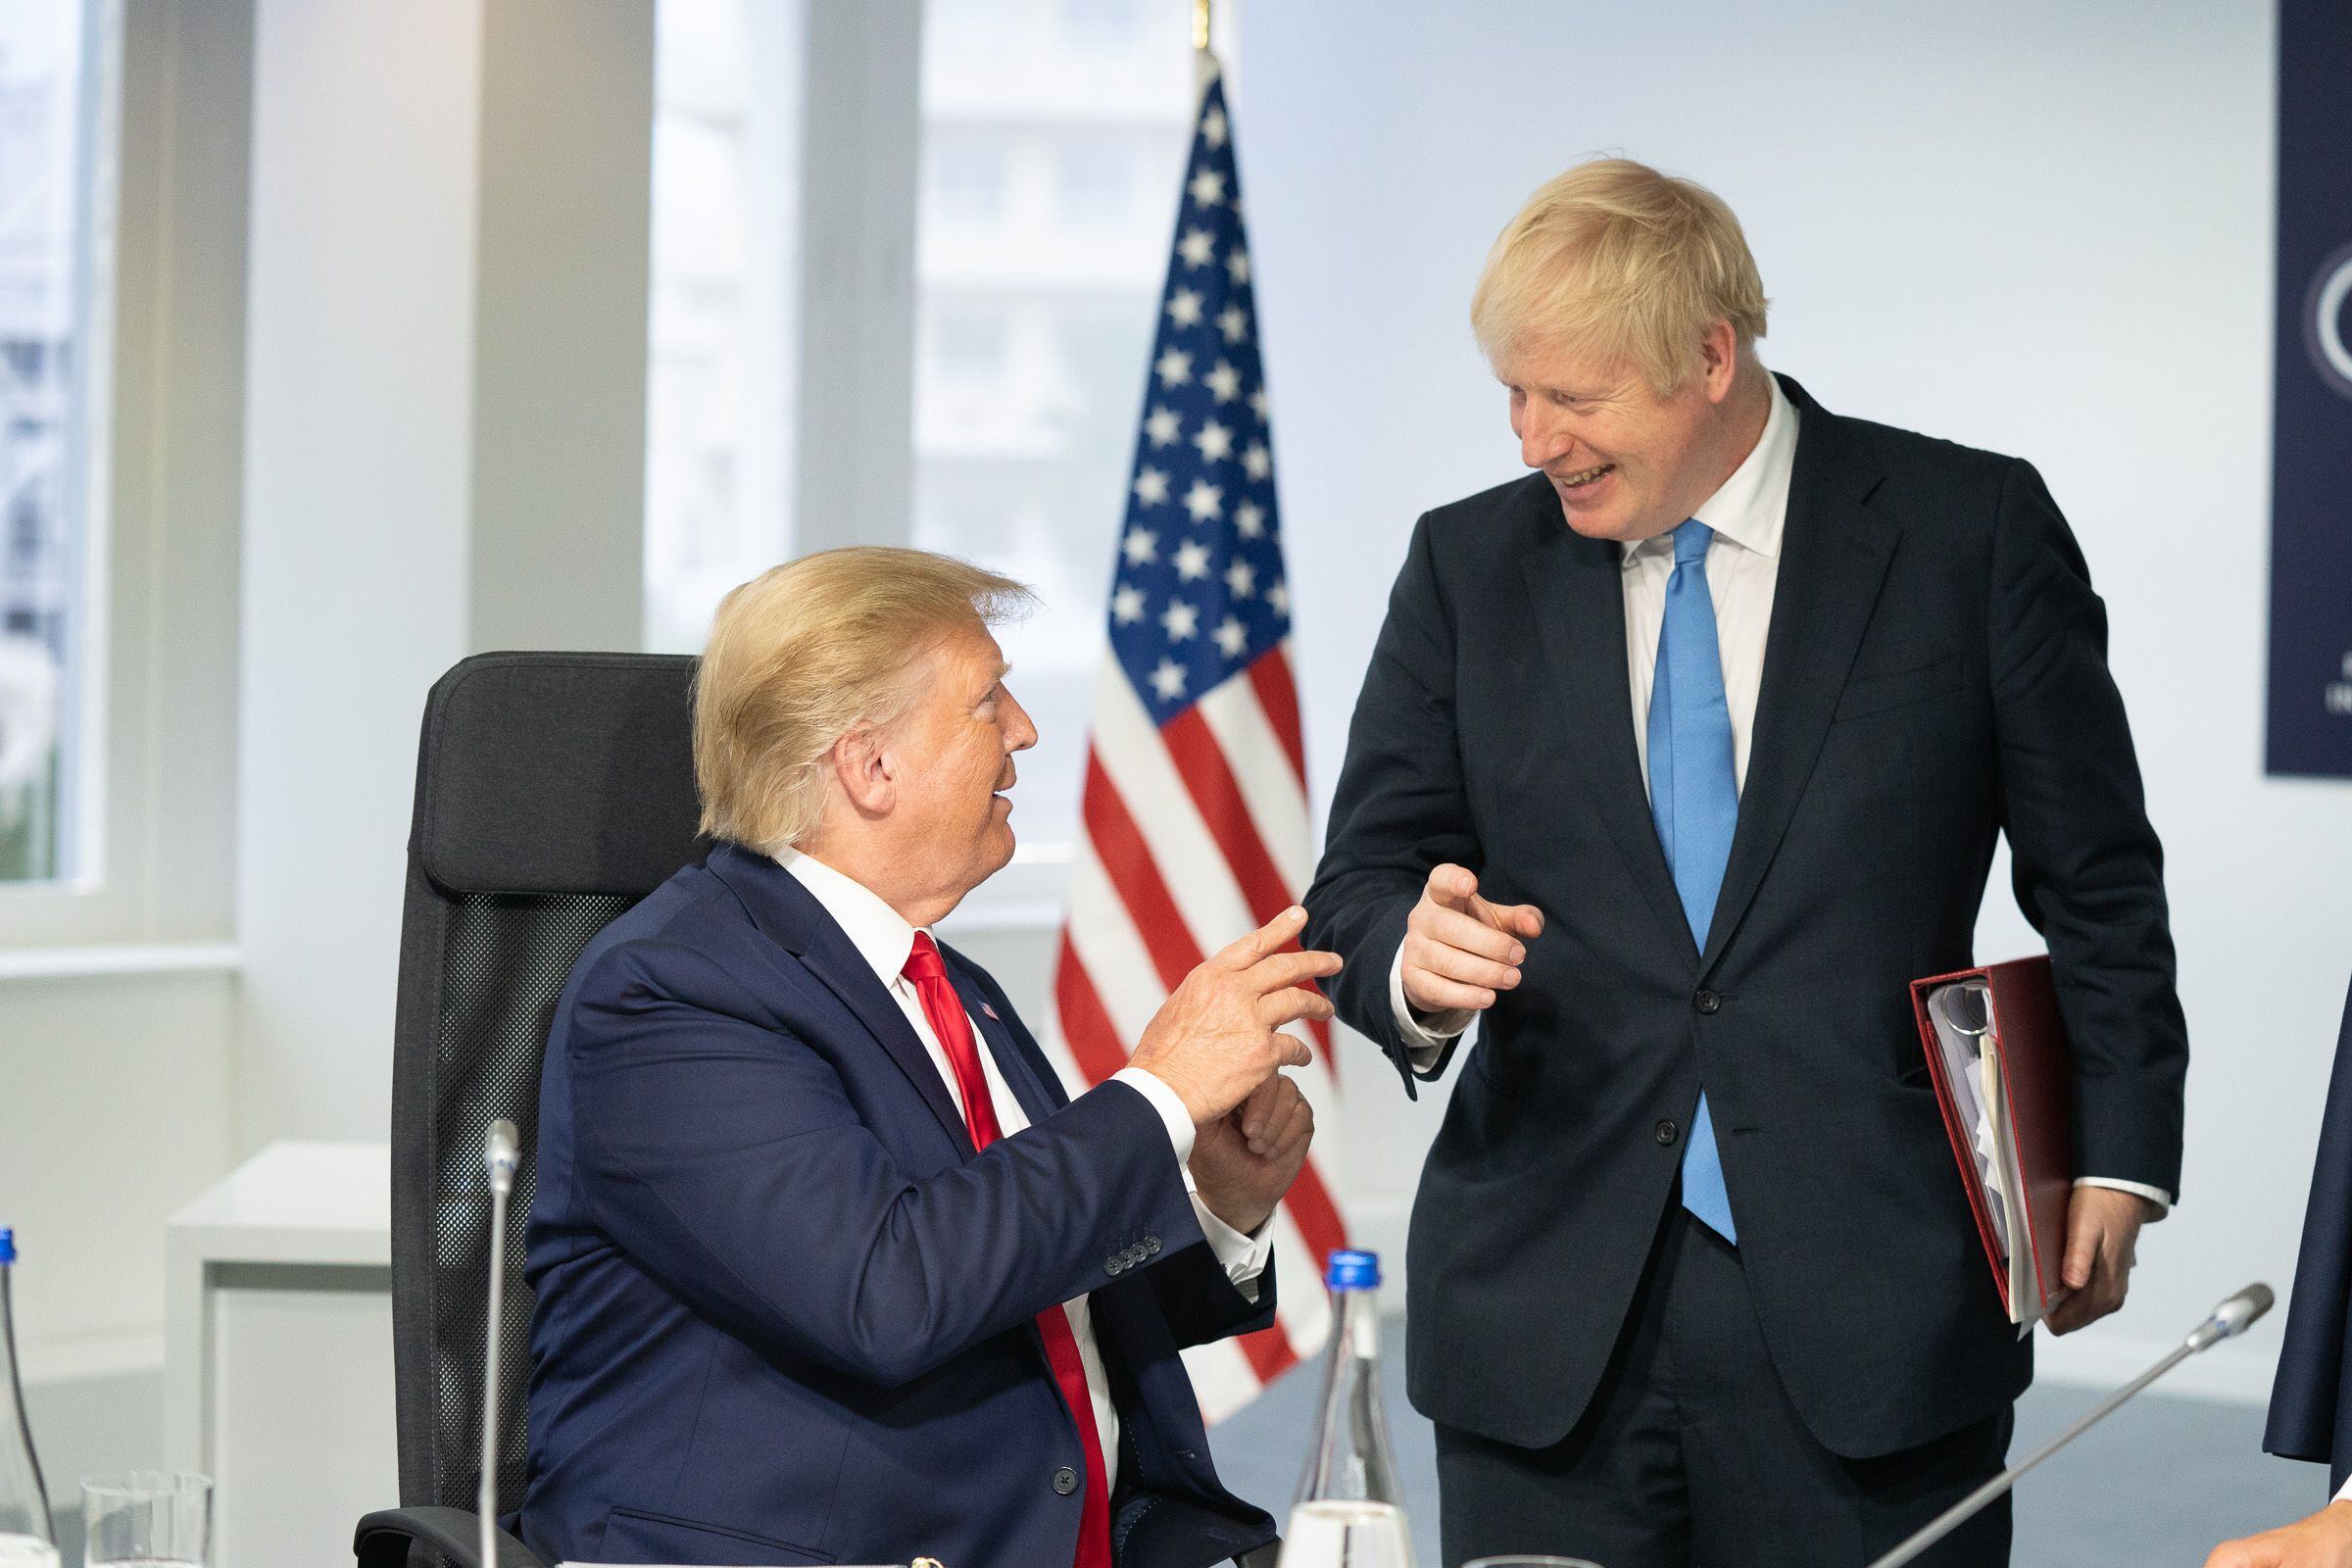 26/08/2019 August 26, 2019 - Biarritz, France - President DONALD  TRUMP holds bilateral meetings BORIS JOHNSON during G7 Summit France.POLITICA Europa Press/Contacto/White House